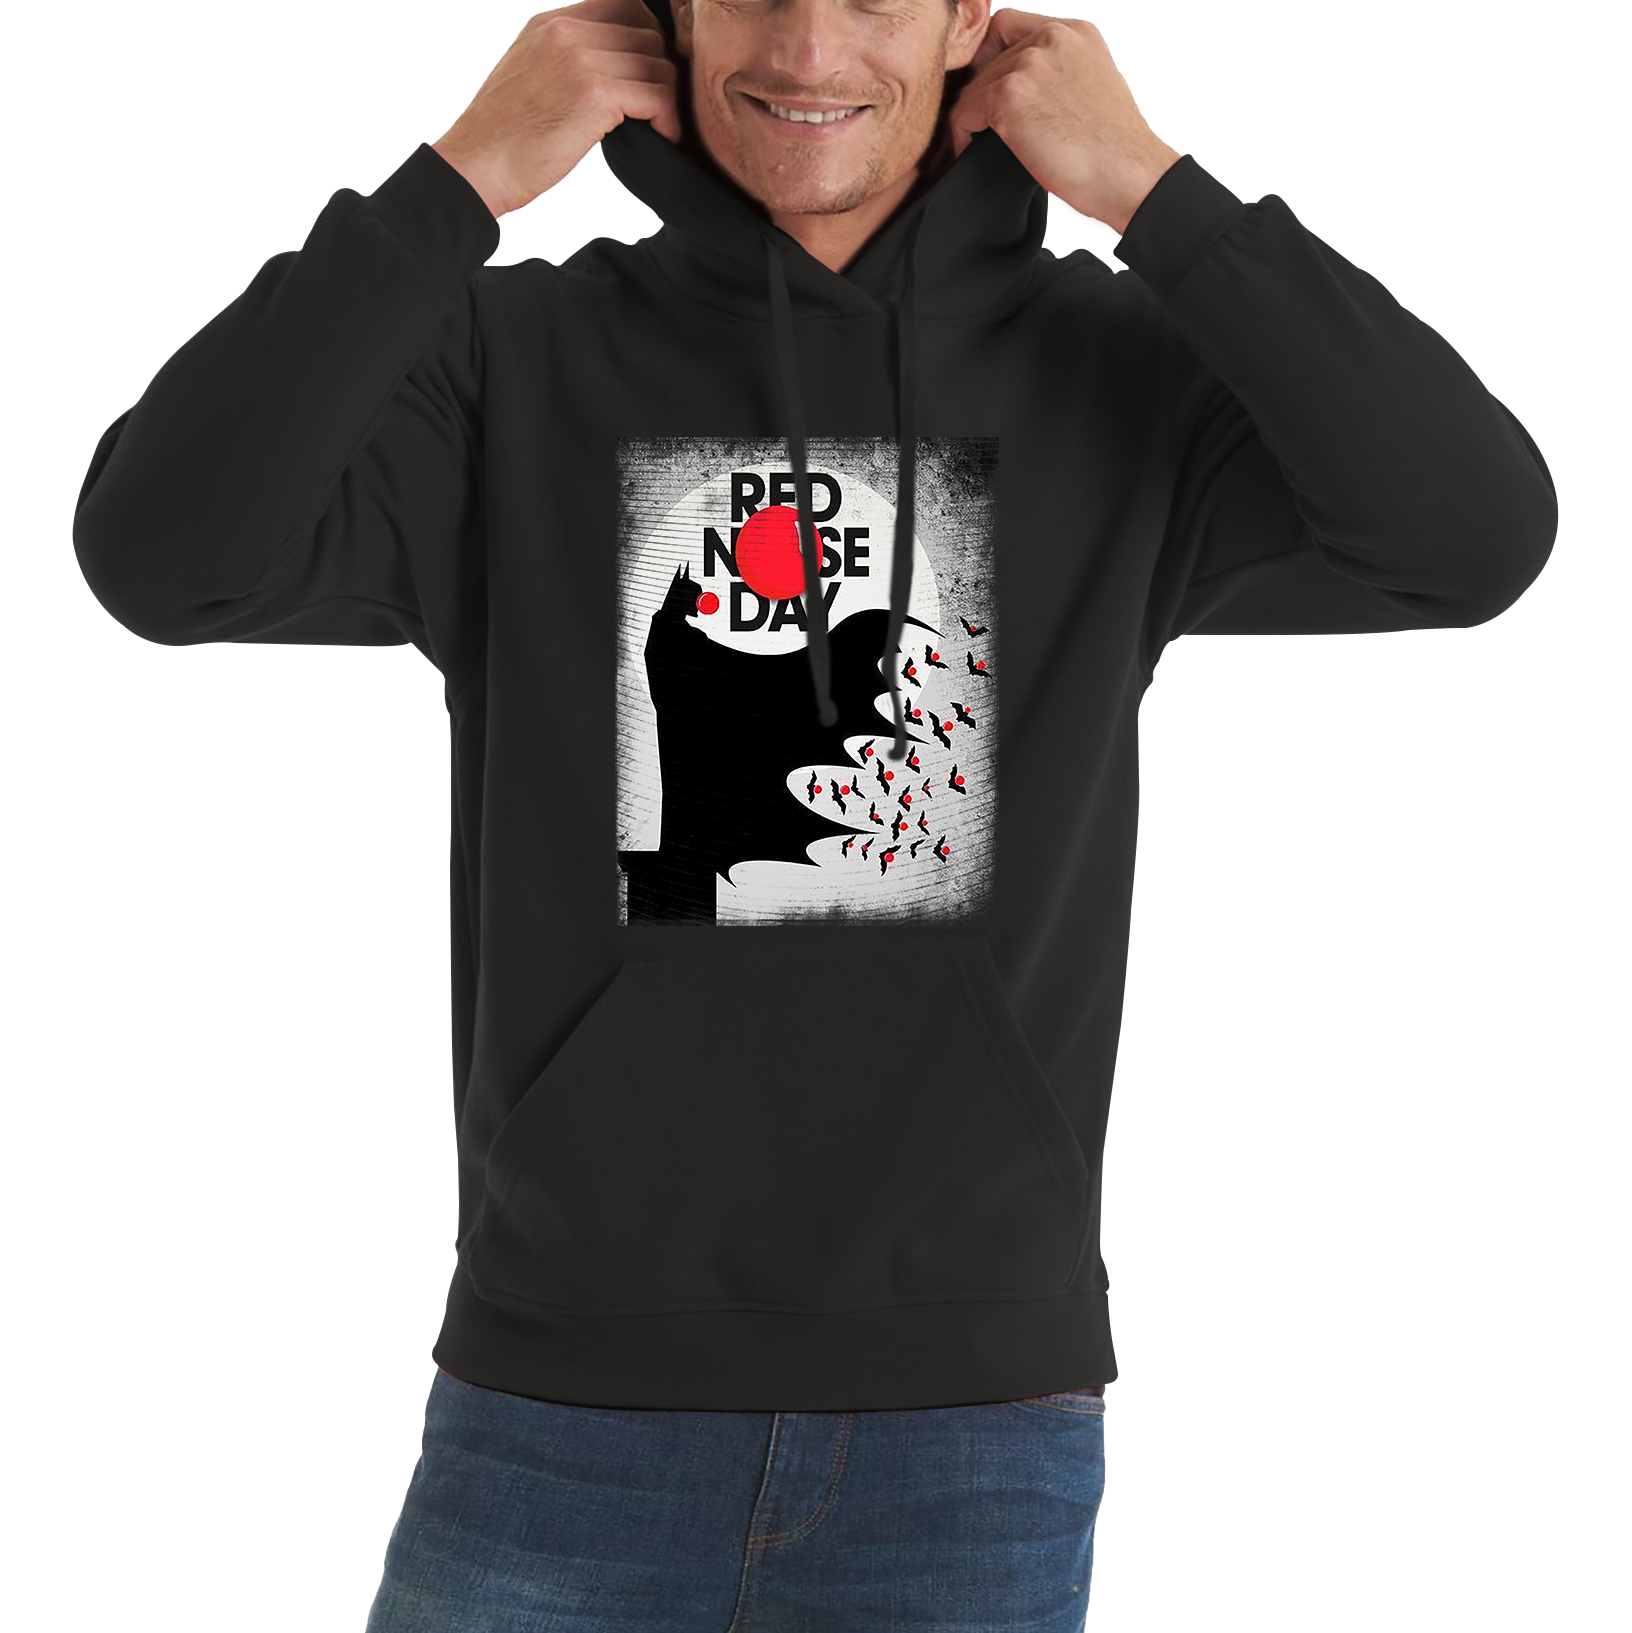 Batman Red Nose Day Adult Hoodie. 50% Goes To Charity